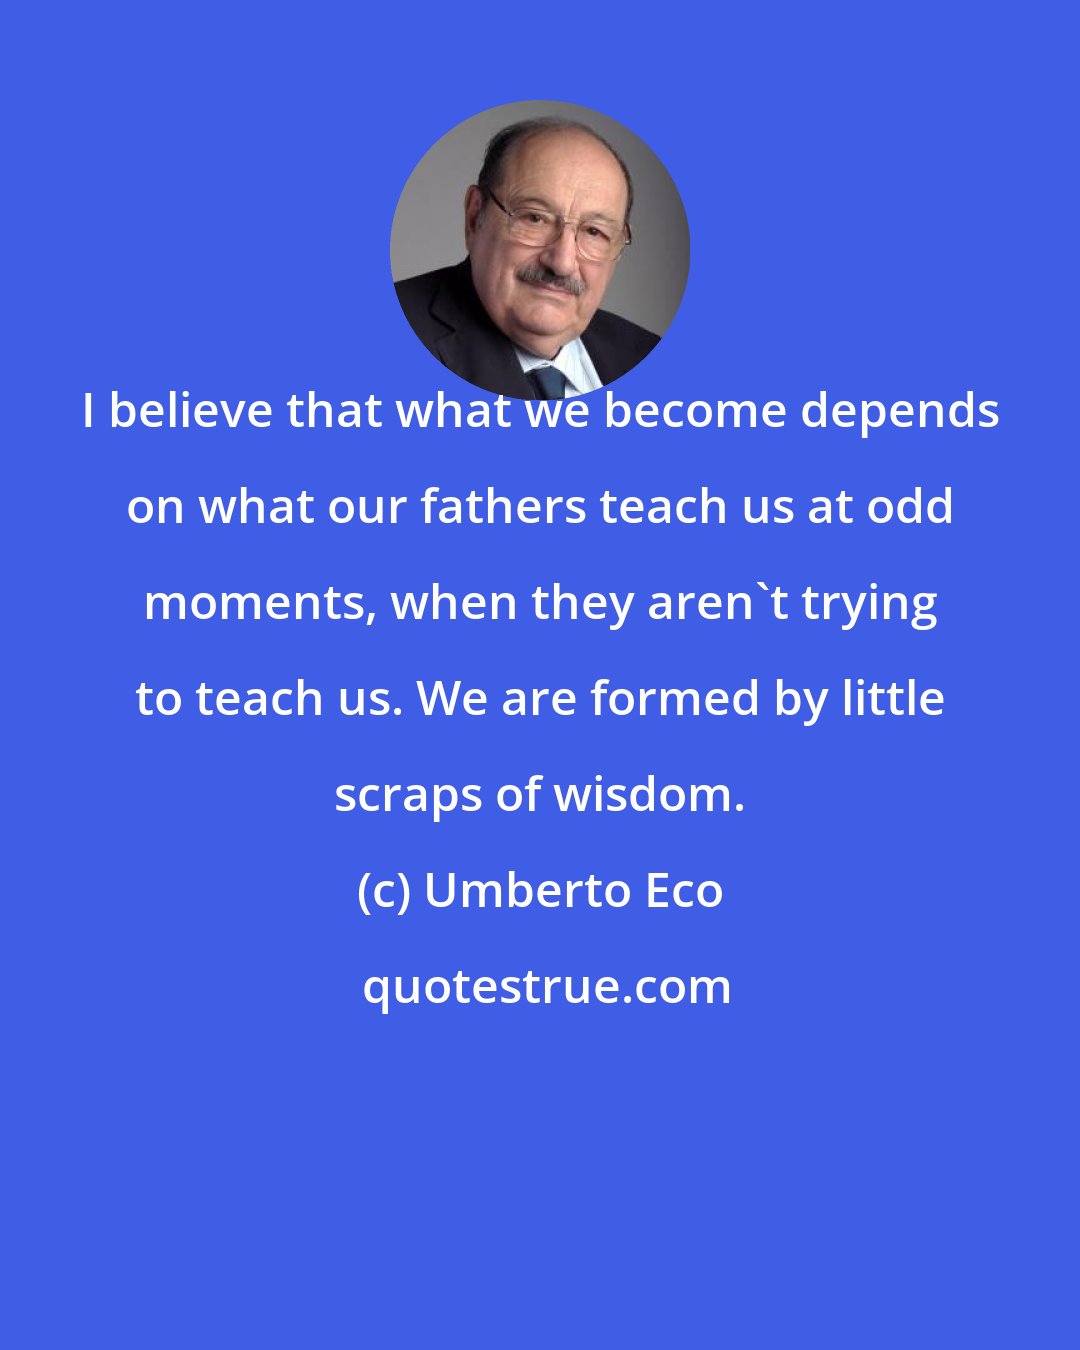 Umberto Eco: I believe that what we become depends on what our fathers teach us at odd moments, when they aren't trying to teach us. We are formed by little scraps of wisdom.